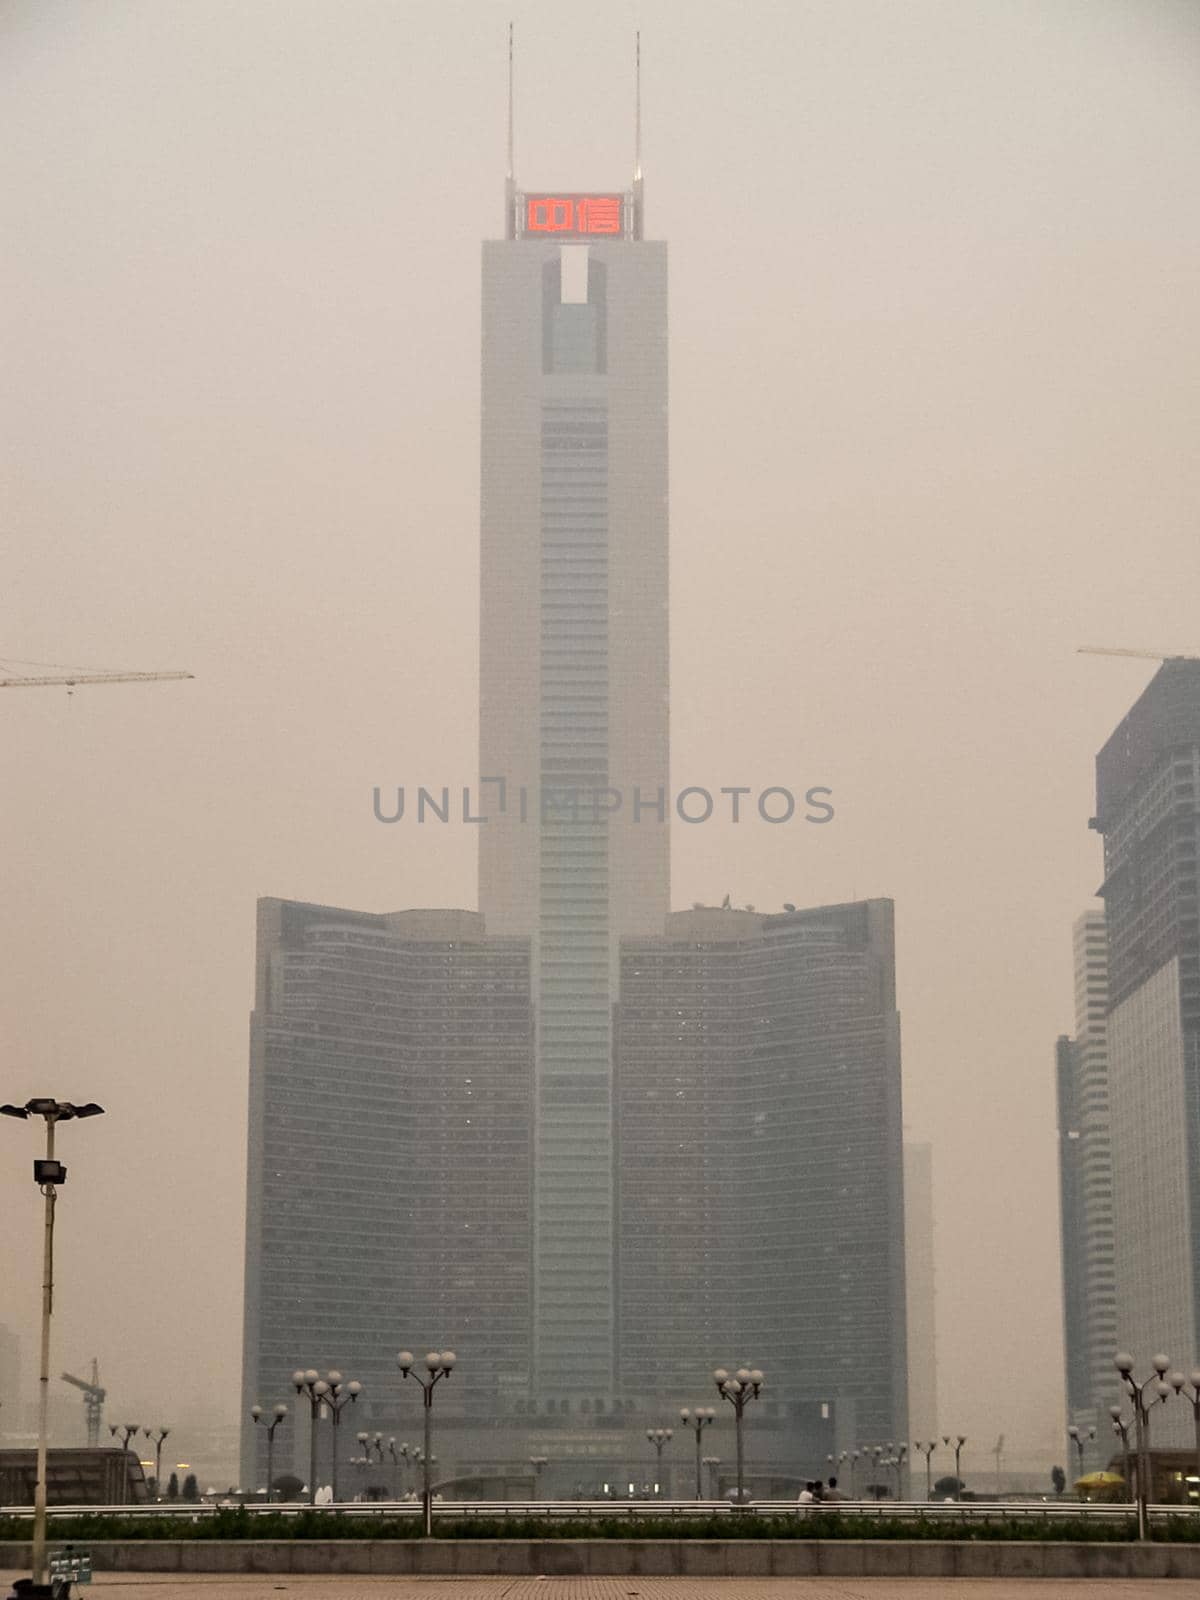 Skyscrapers of Hong Kong. cityscape through a haze of smog over the city. by DePo